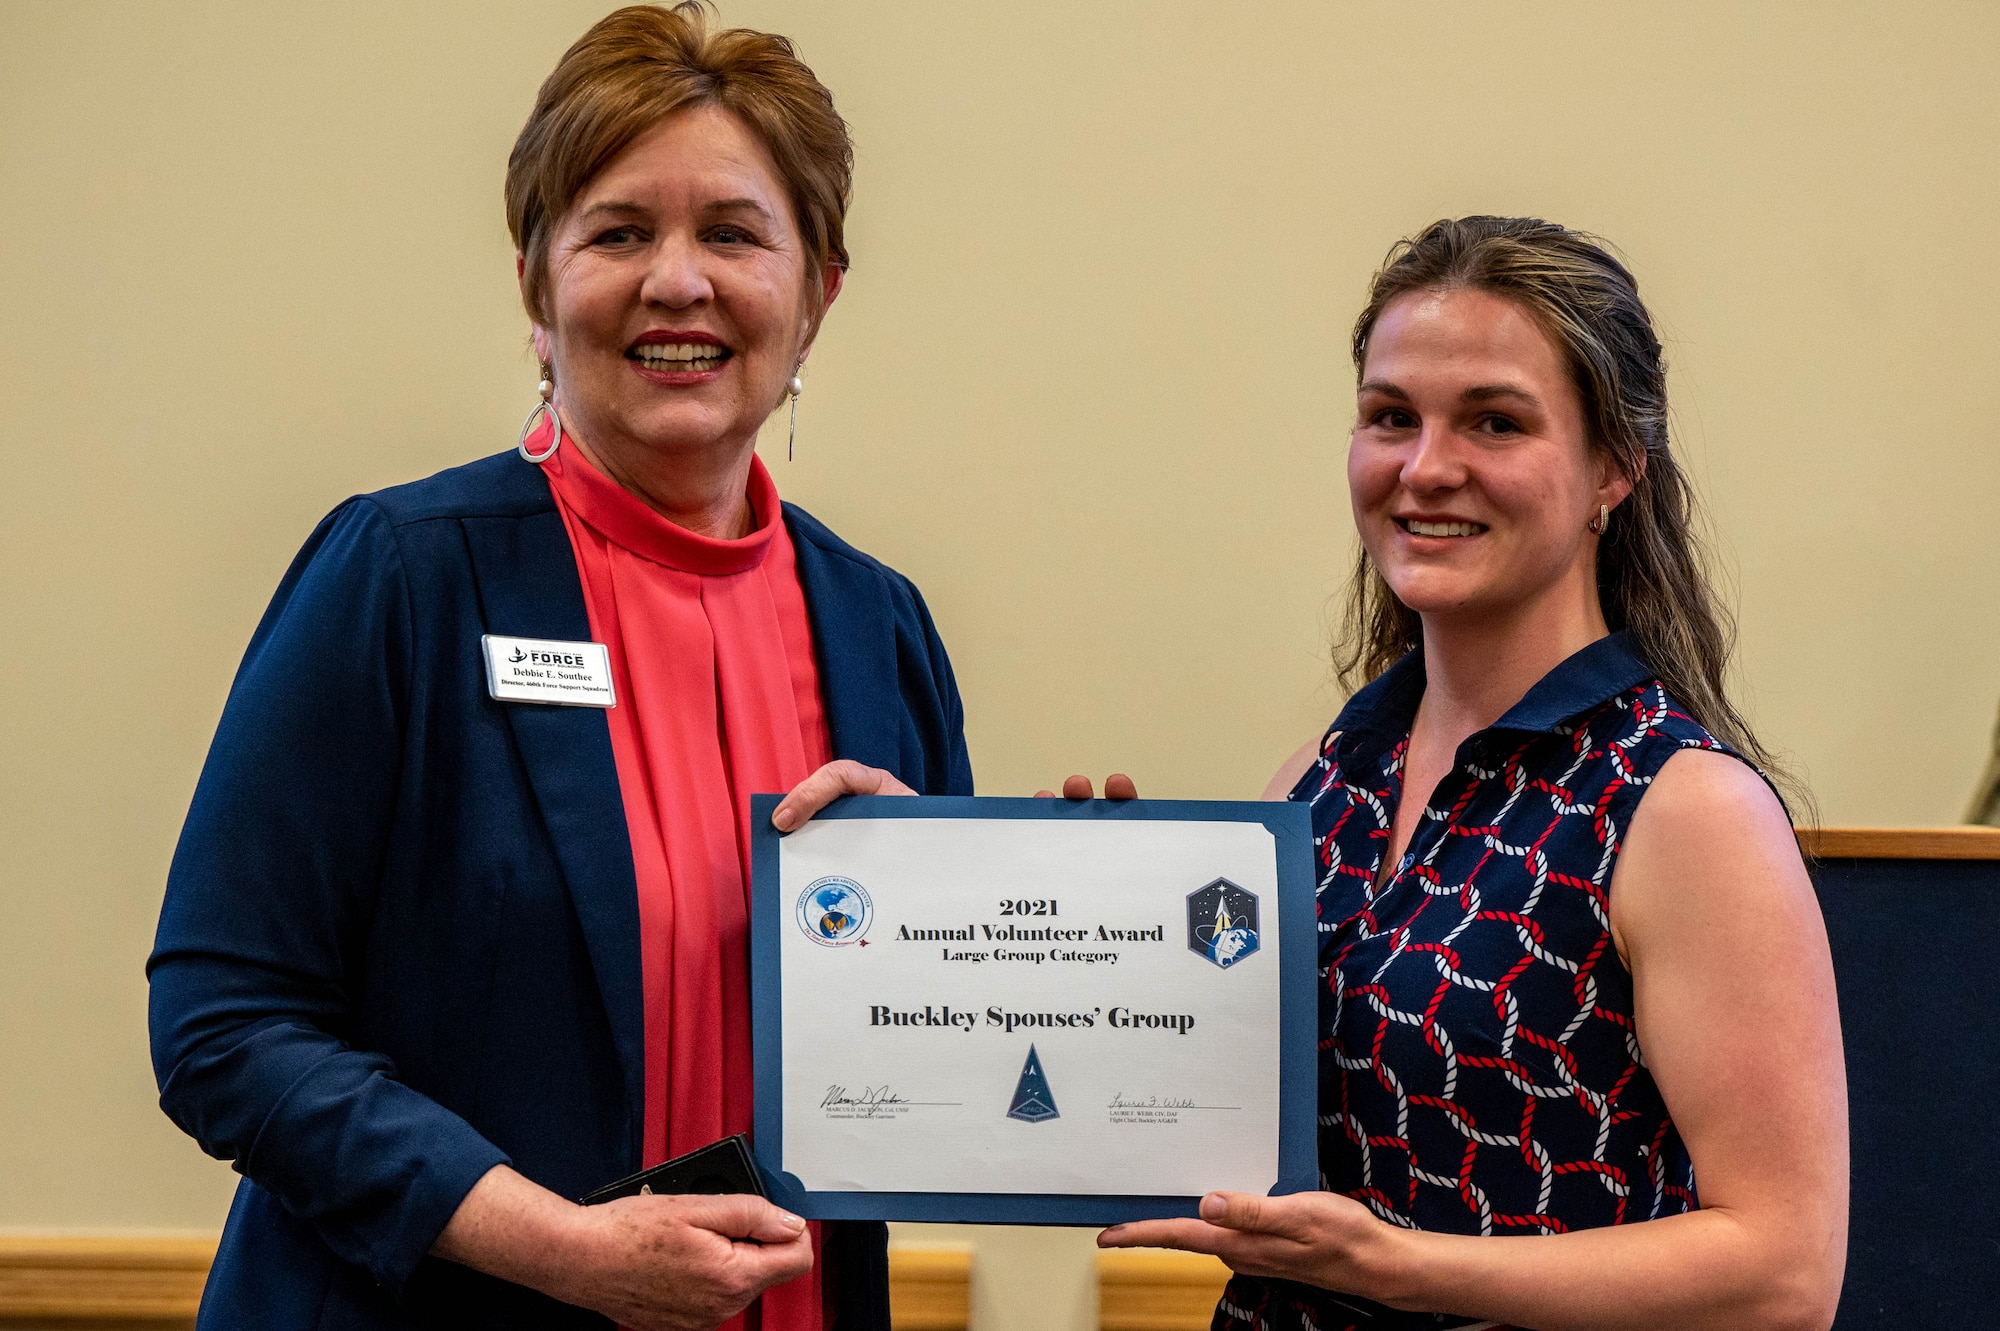 Scarlet Byrne, A member of the Buckley Spouses’ Group, accepts an award on the behalf of the Buckley Spouses’ Group for volunteer excellence from Mrs. Debbie South, Director of the 460th Force Support Squadron  at Buckley Space Force Base, Colo., April 22, 2022.